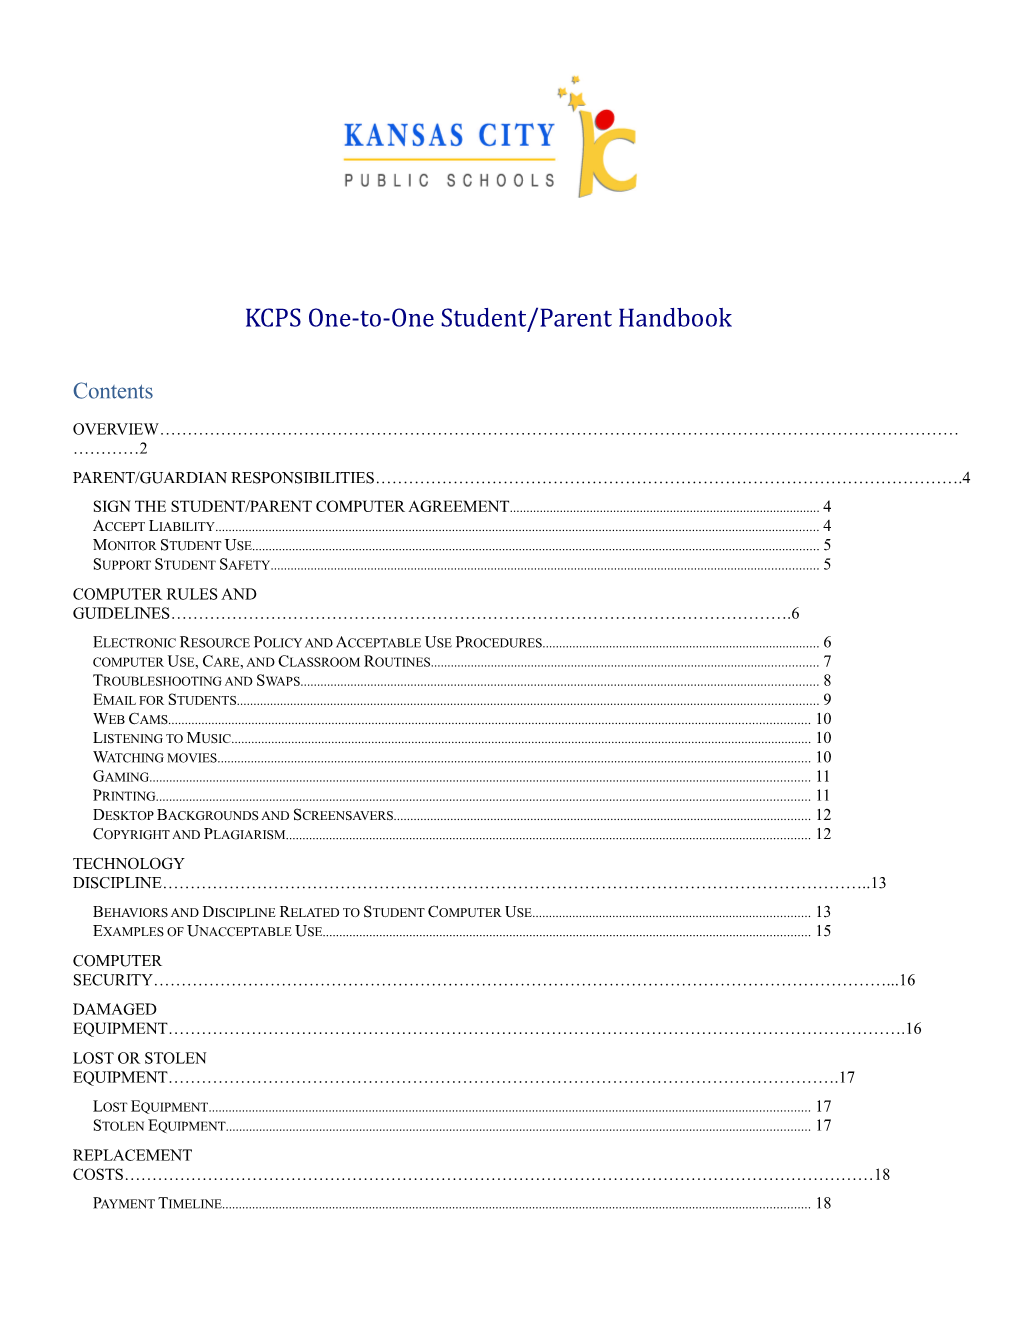 KCPS One-To-One Student/Parent Handbook